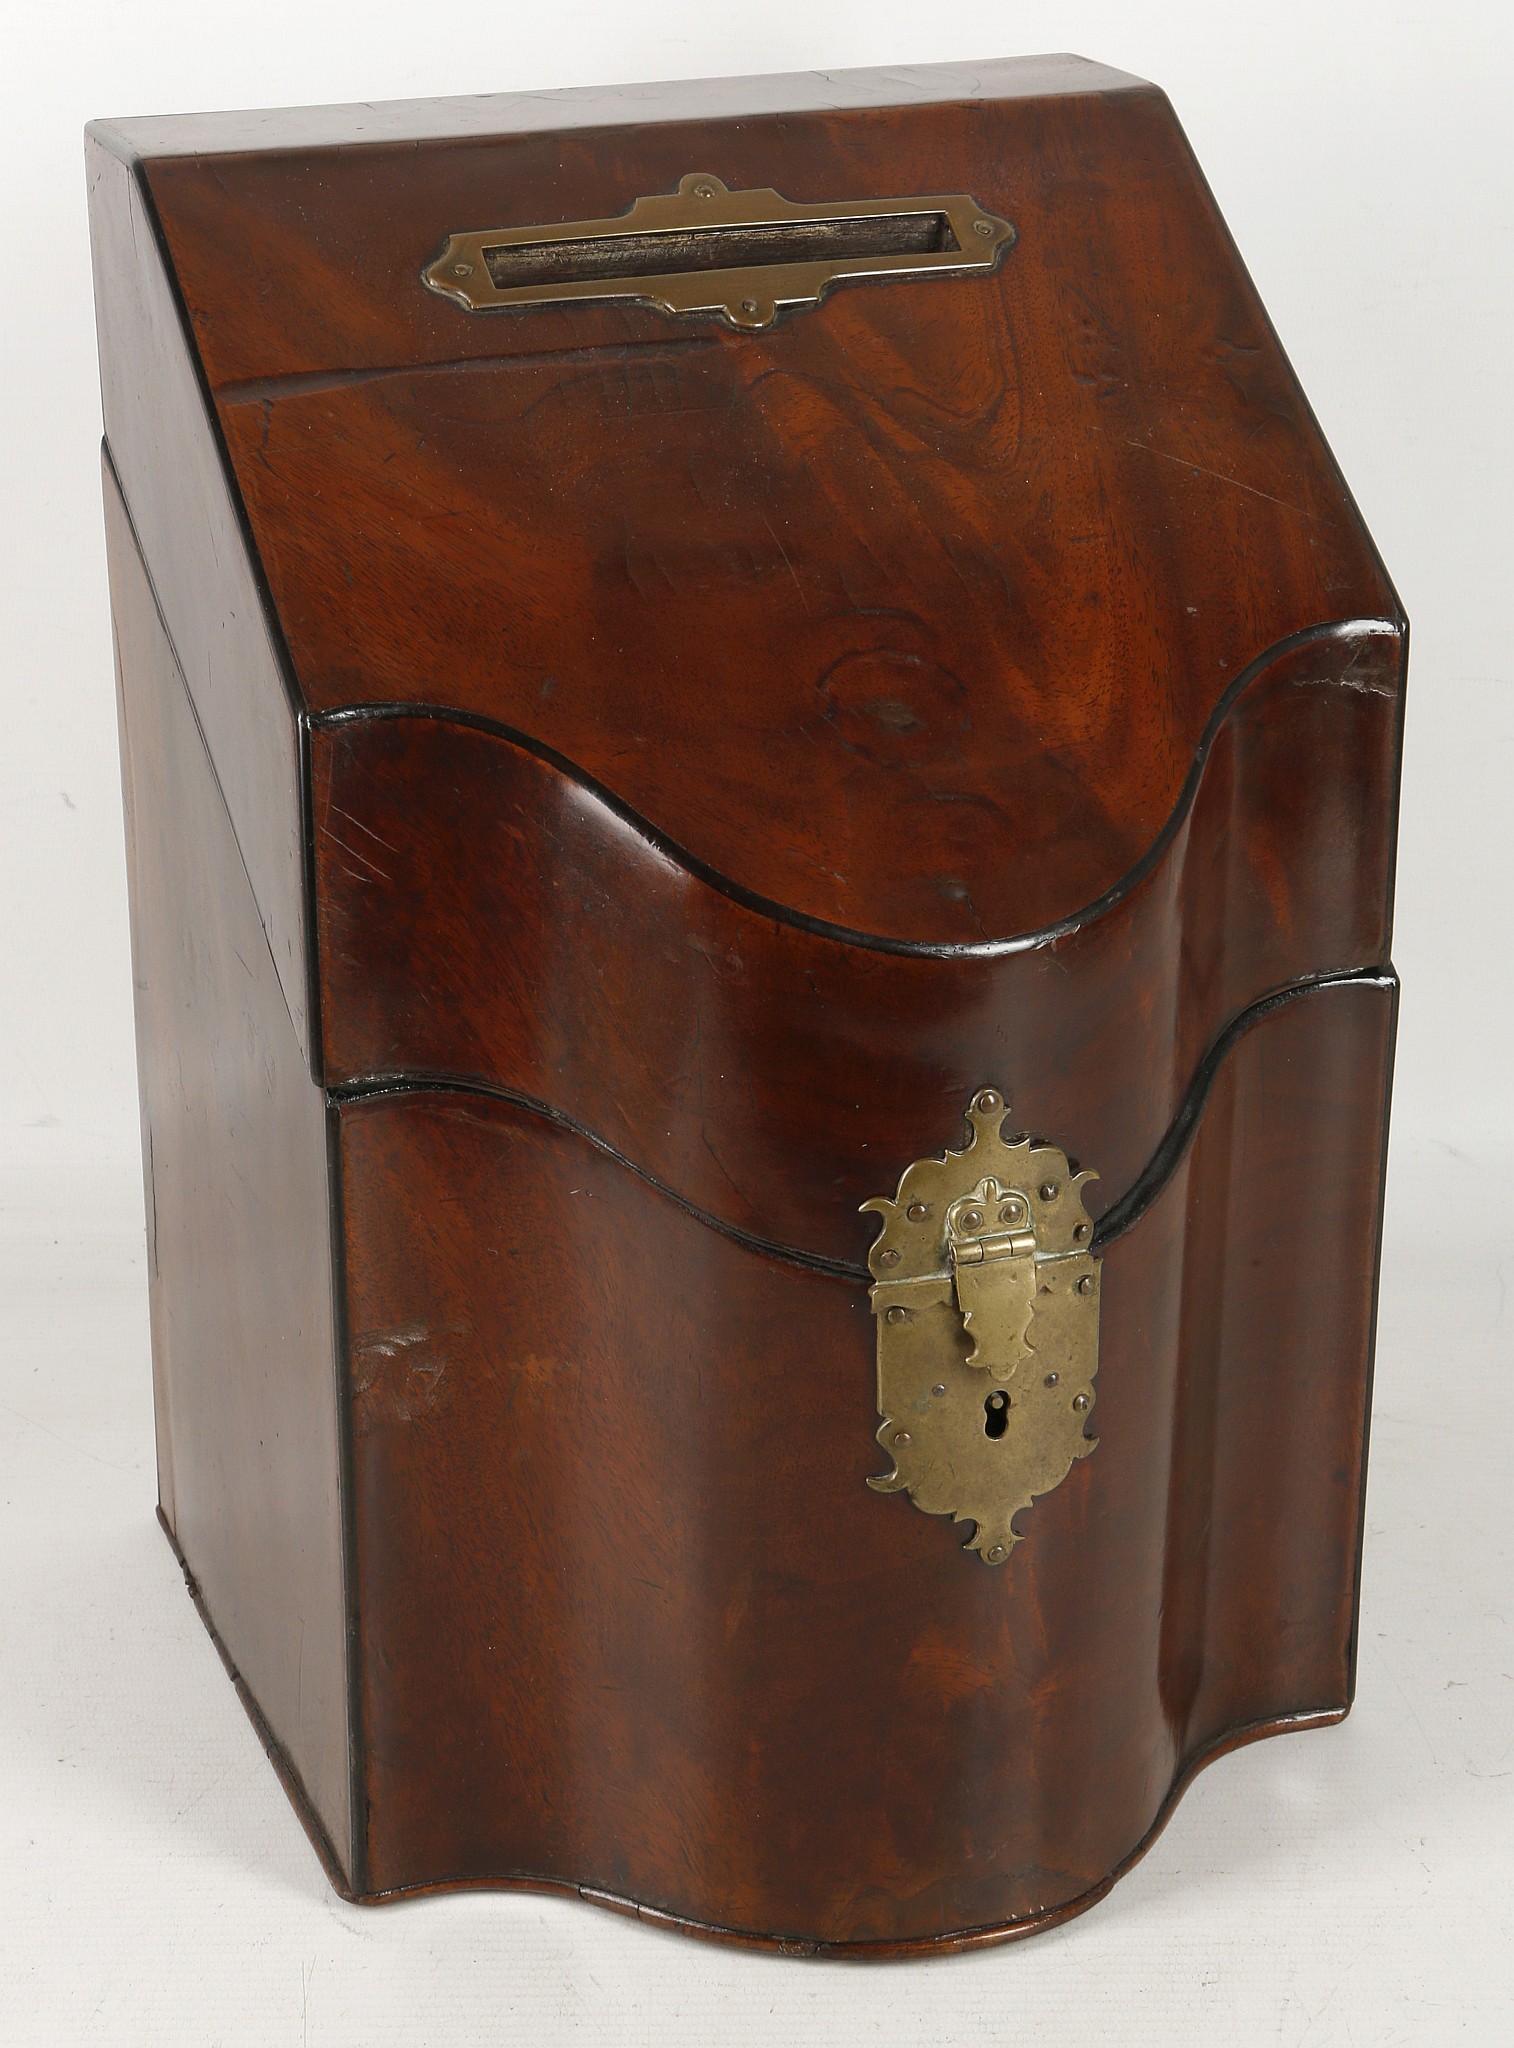 A Georgian mahogany serpentine front knife box, now converted for use as a letterbox, having a brass